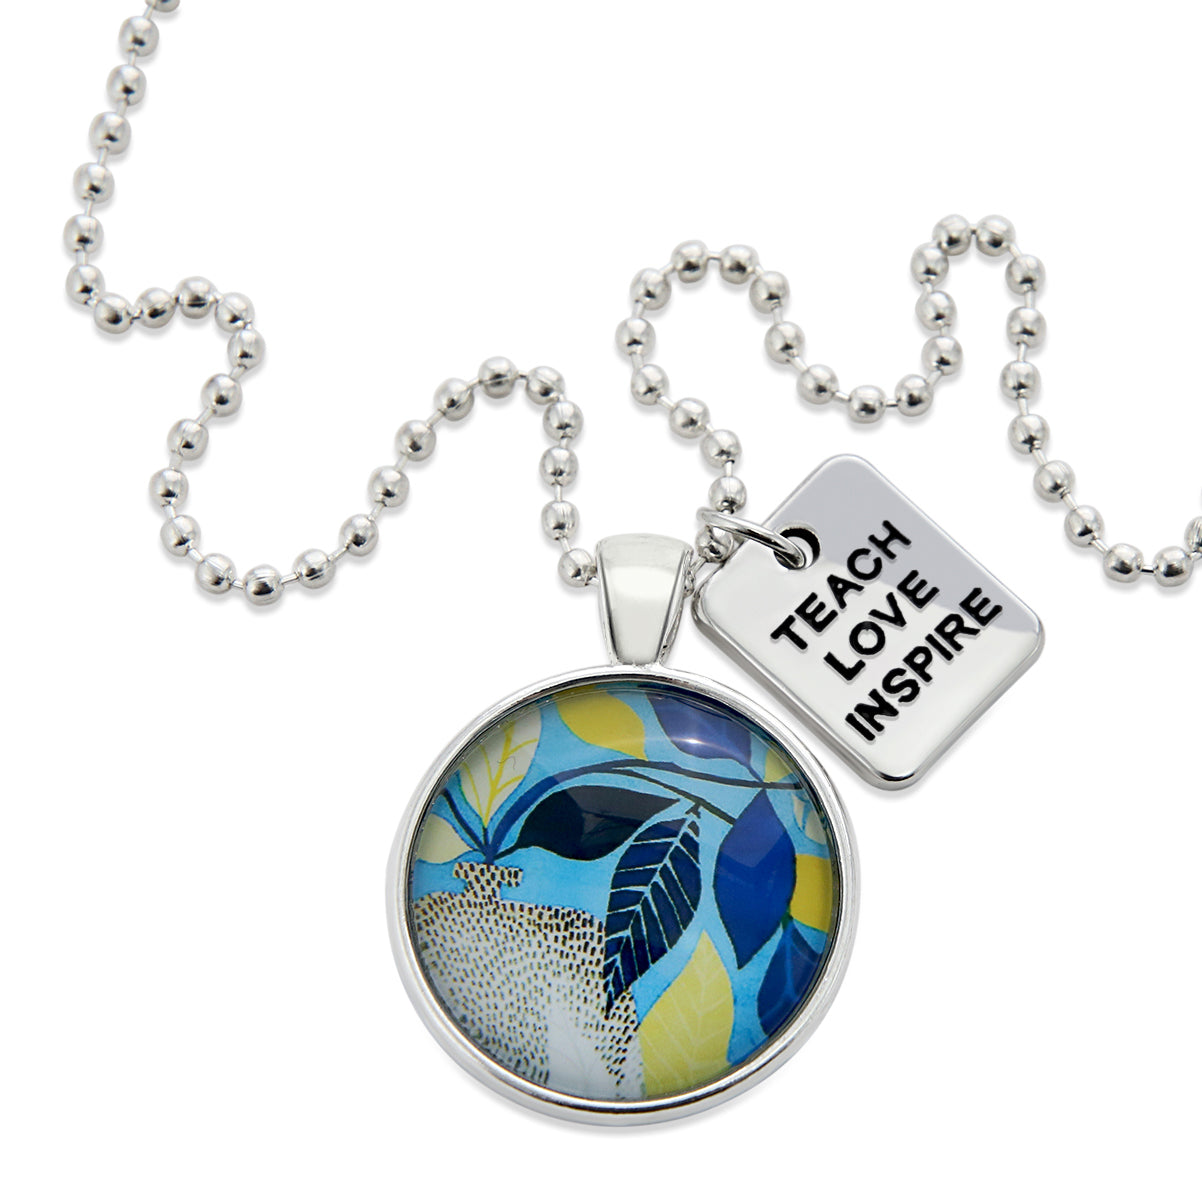 Blue Collection - Bright Silver 'TEACH LOVE INSPIRE' Necklace - Dolce (10832)